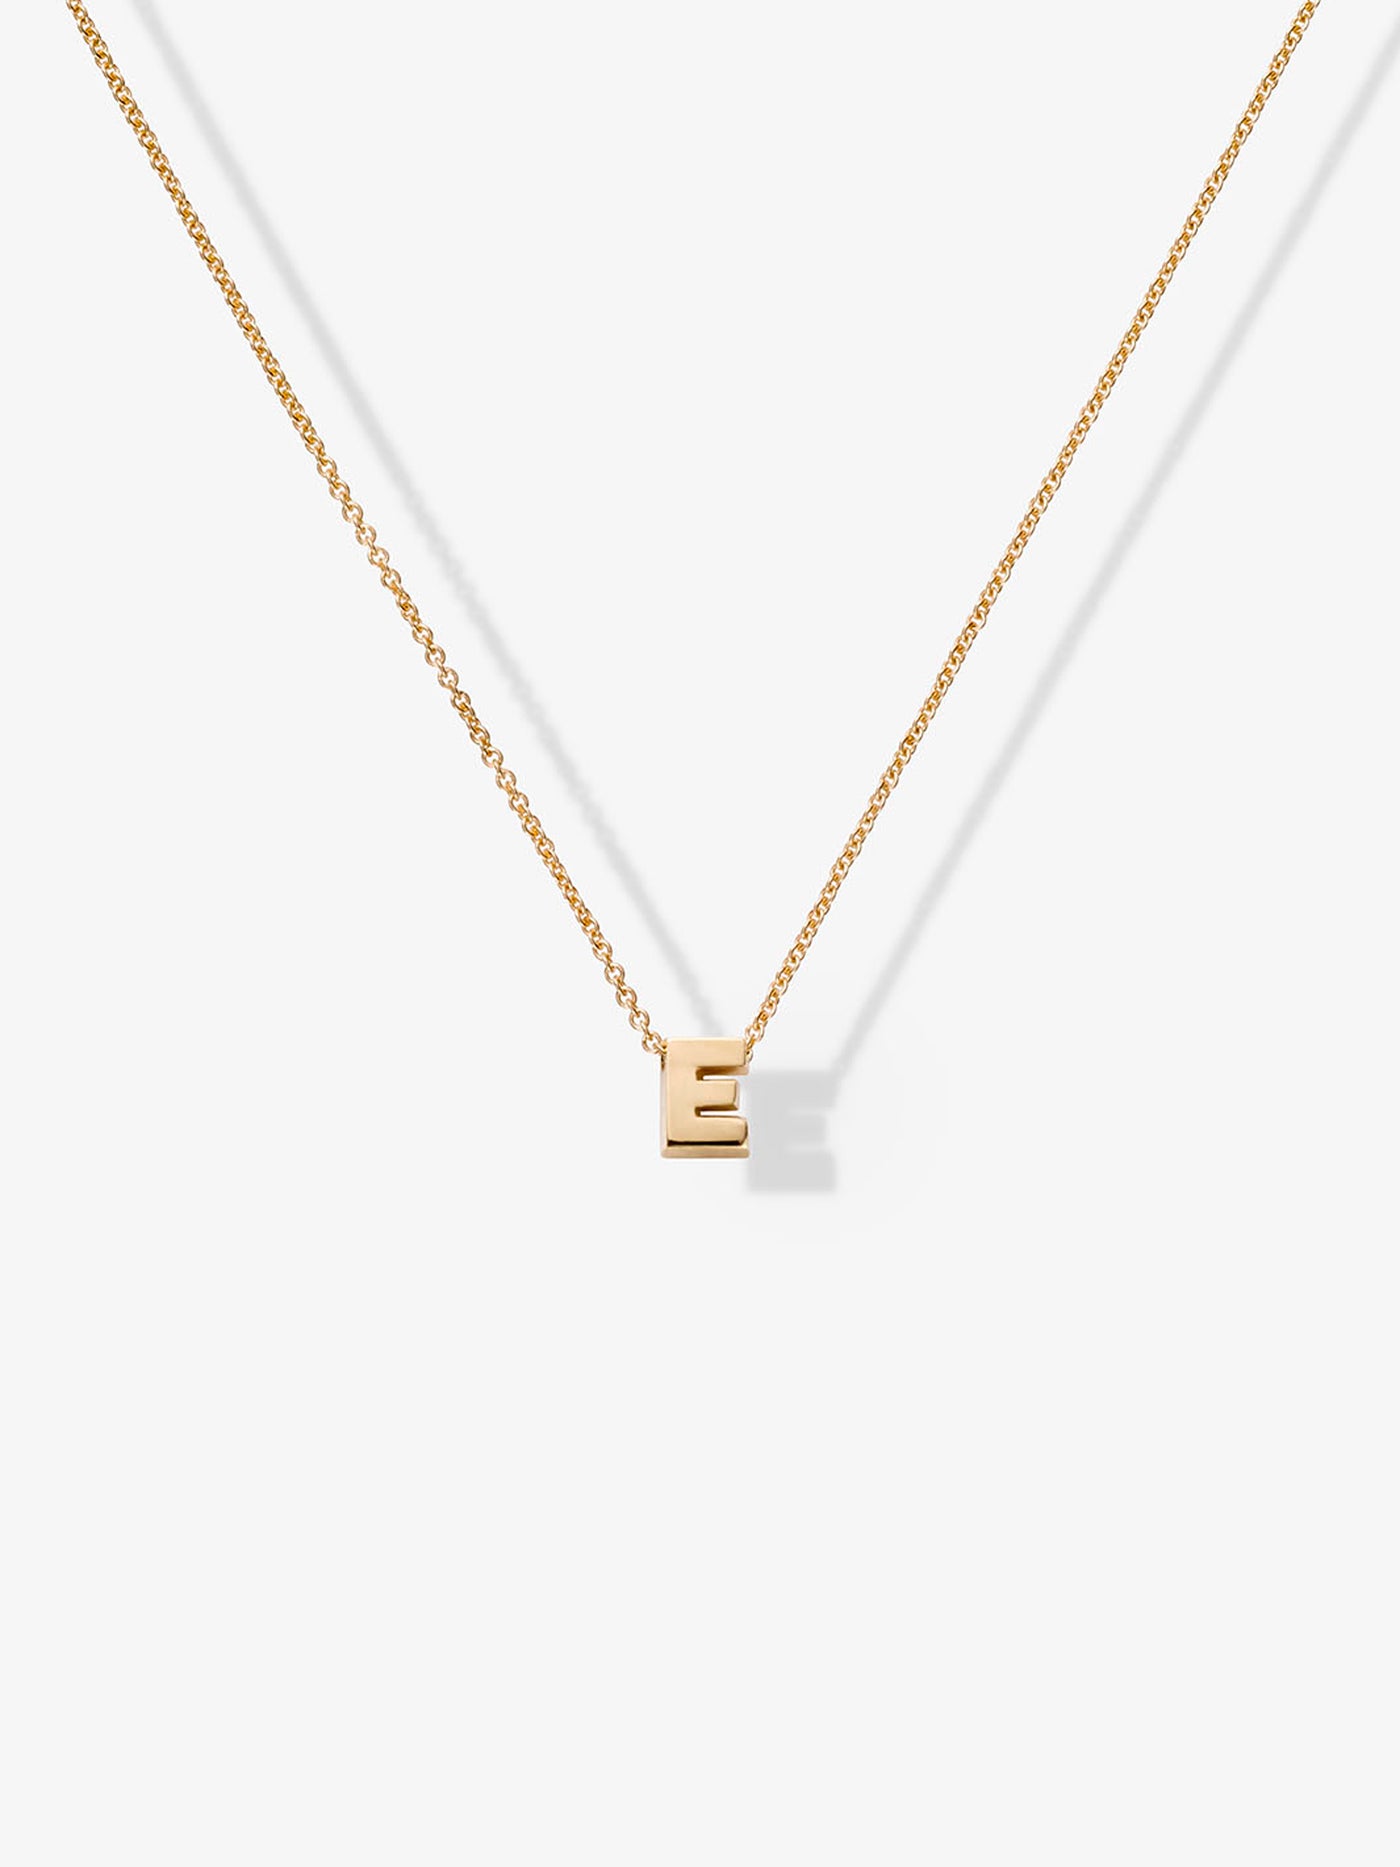 Letter E Necklace in 18k Gold